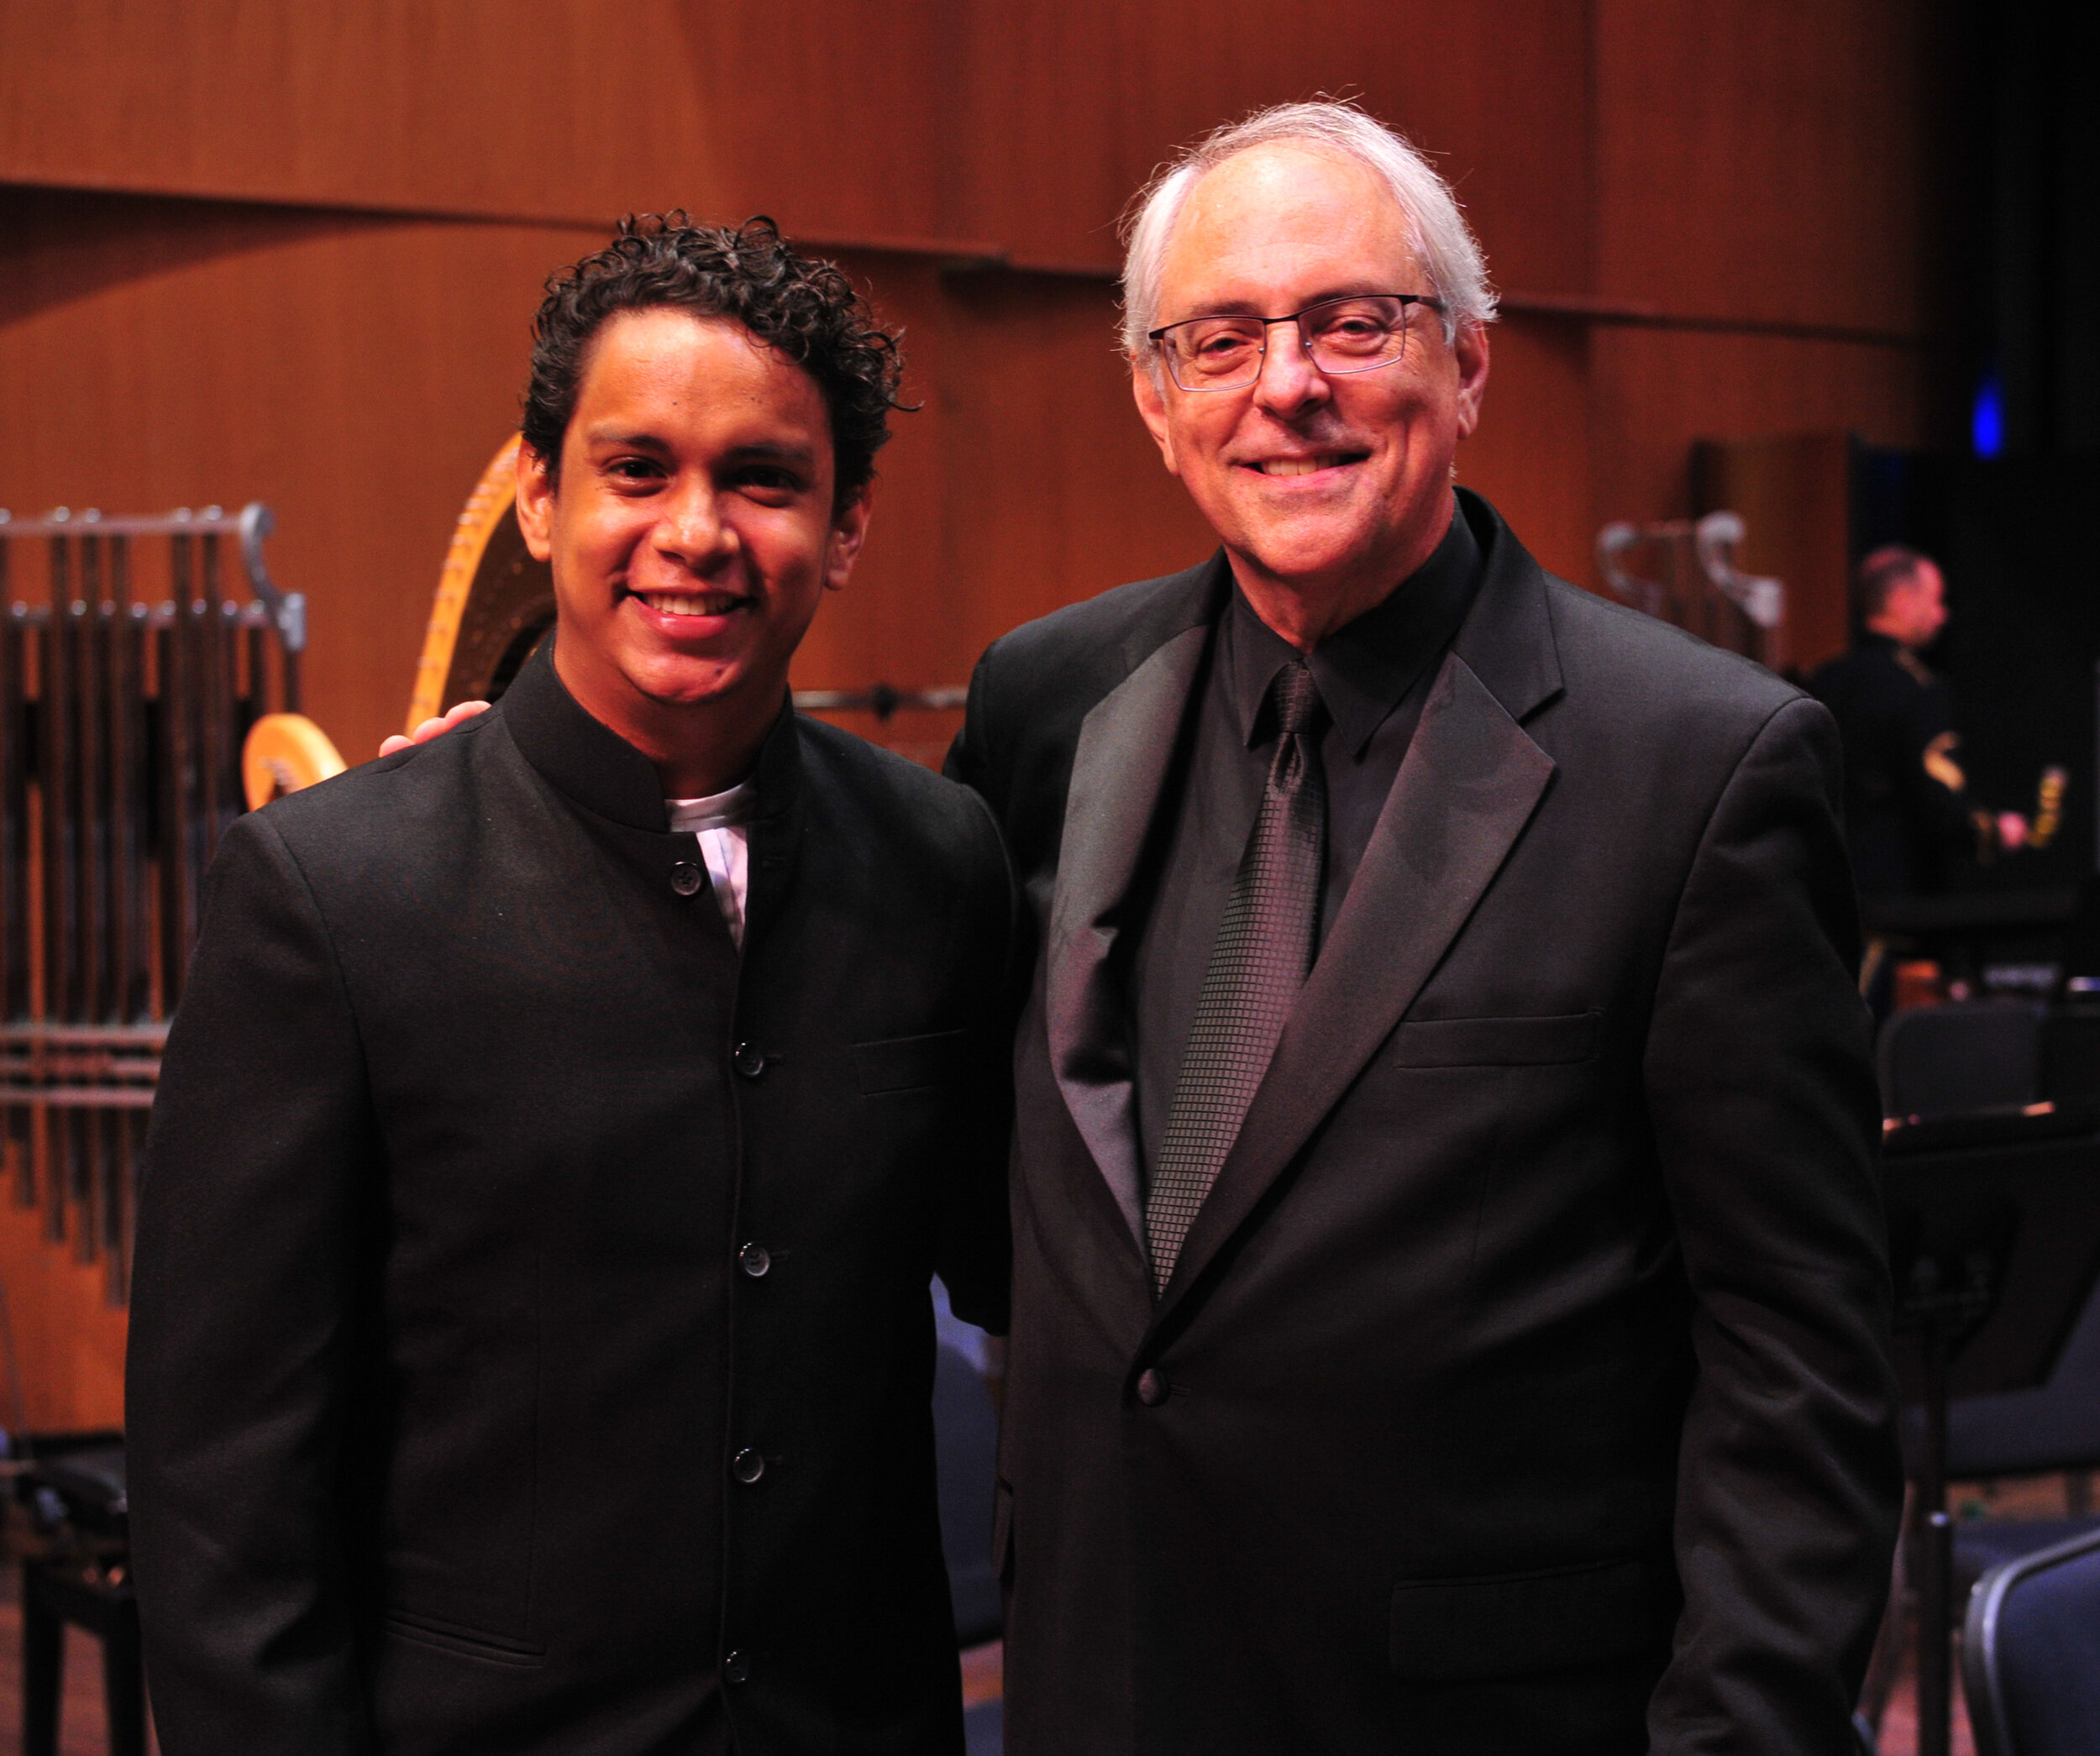 Sharing stage with Professor Michael Haithcock and The United States Army Band “Pershing’s Own”